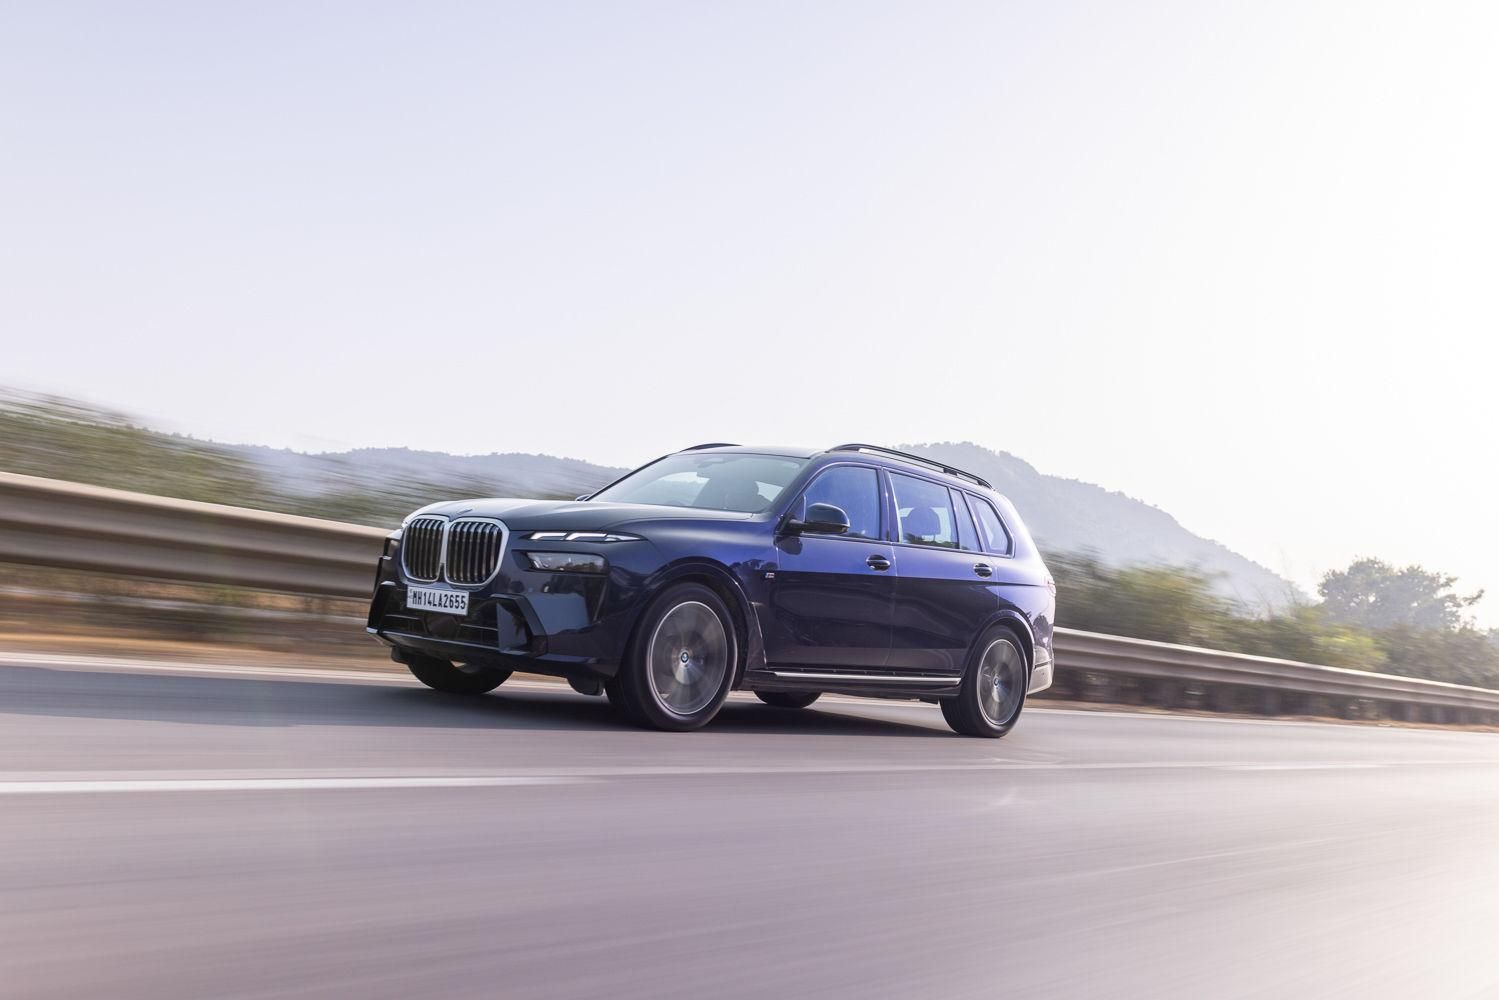 BMW X7: First Drive Review In India